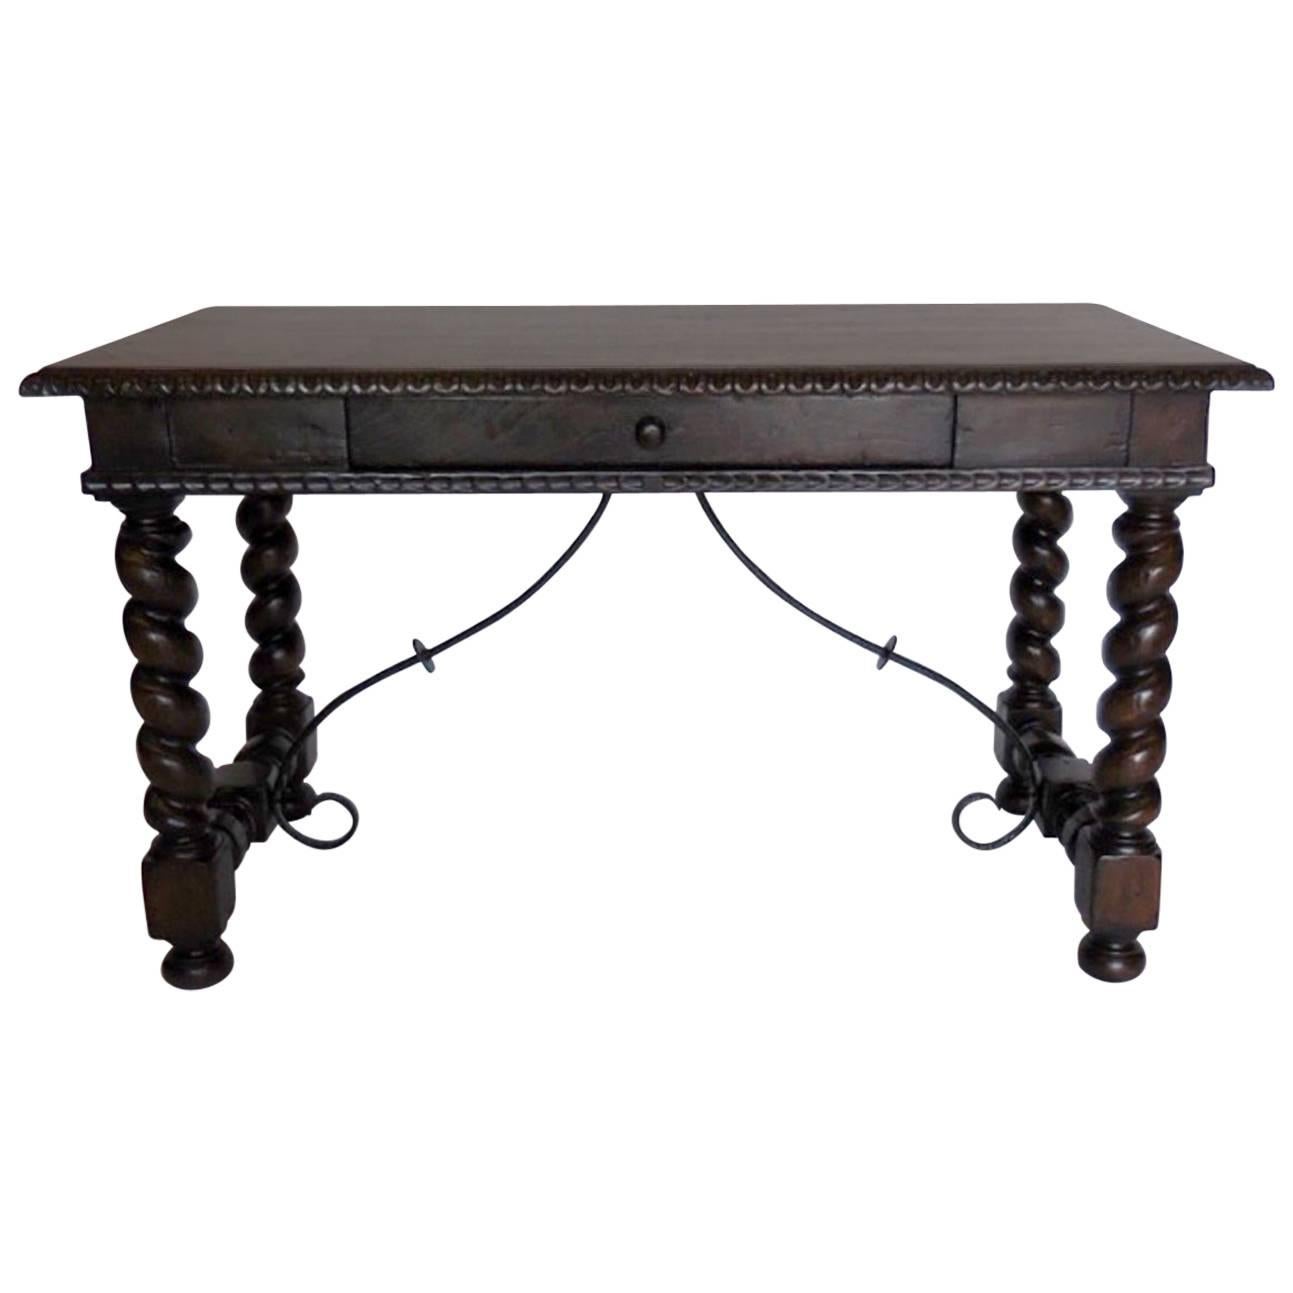 Dos Gallos Custom Barley Twist Writing Desk With Carved Detail and Iron Support